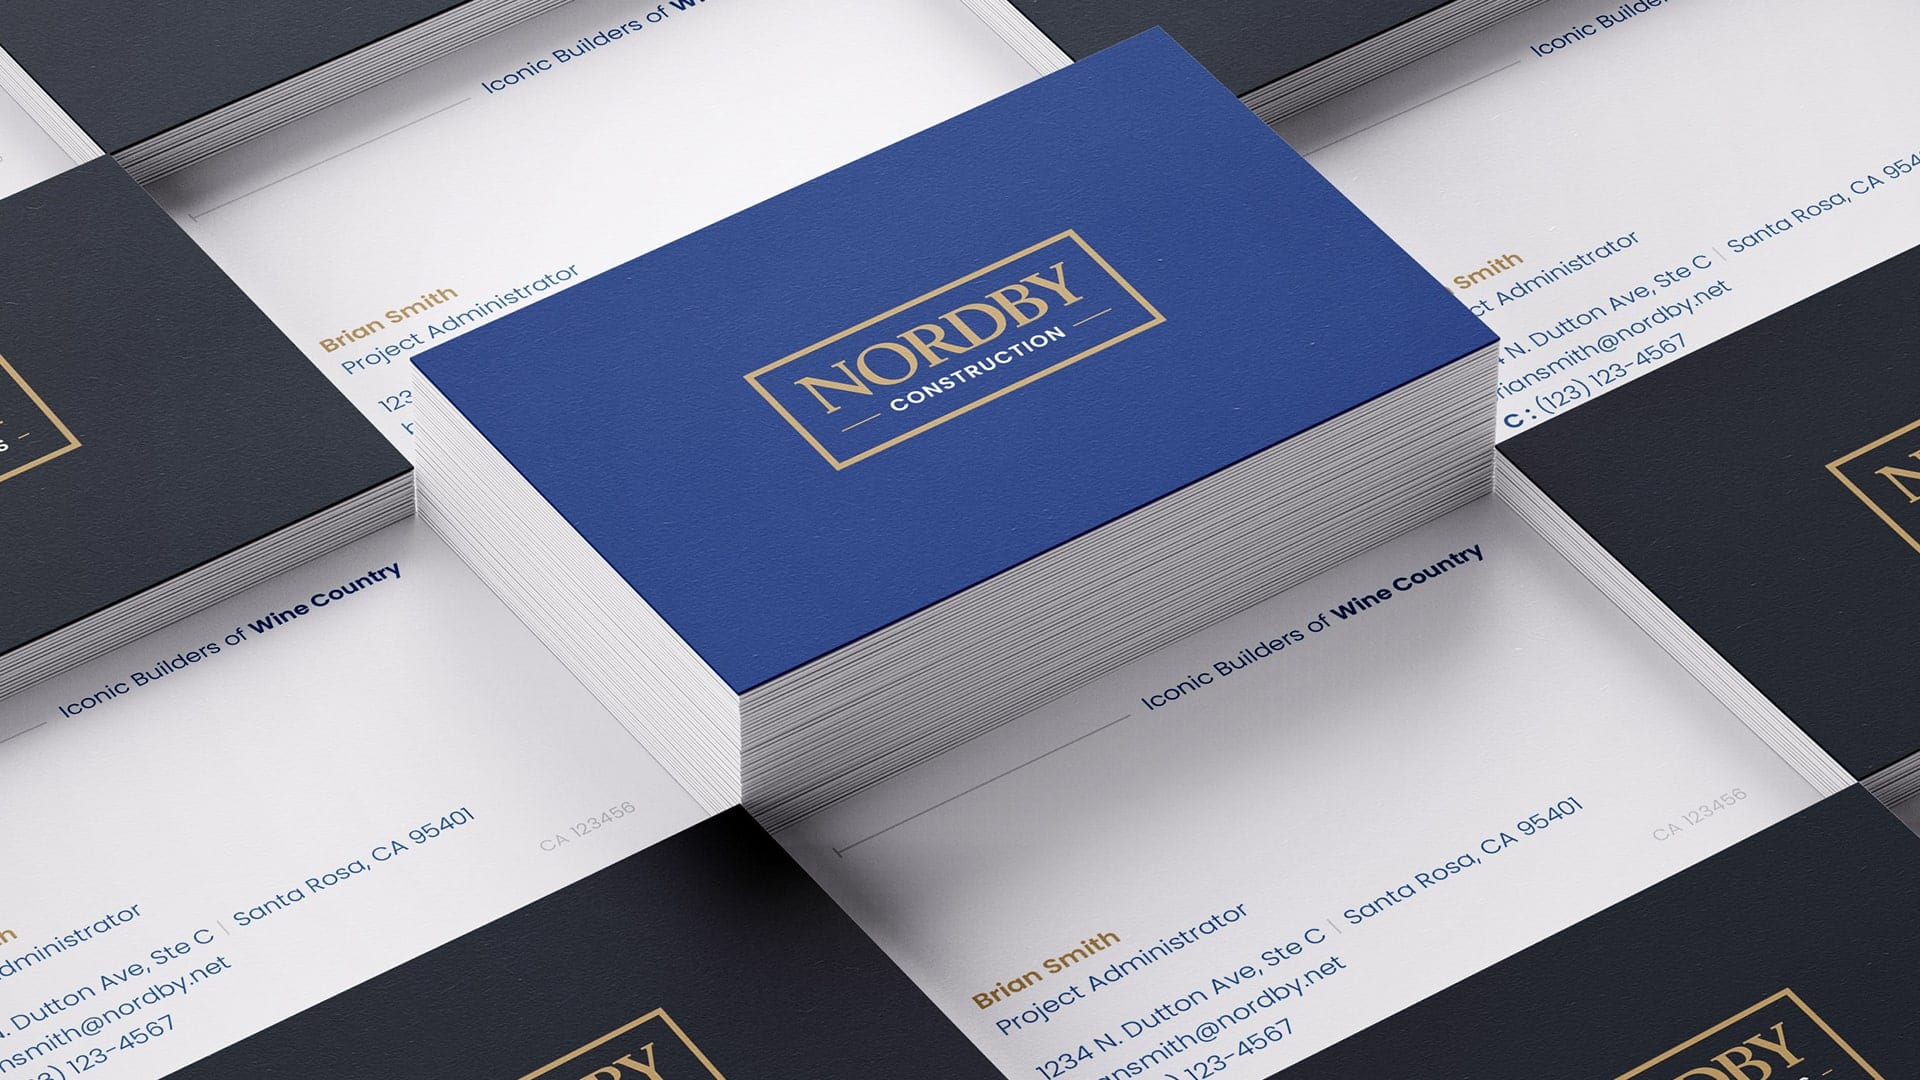 Nordby Construction business cards design